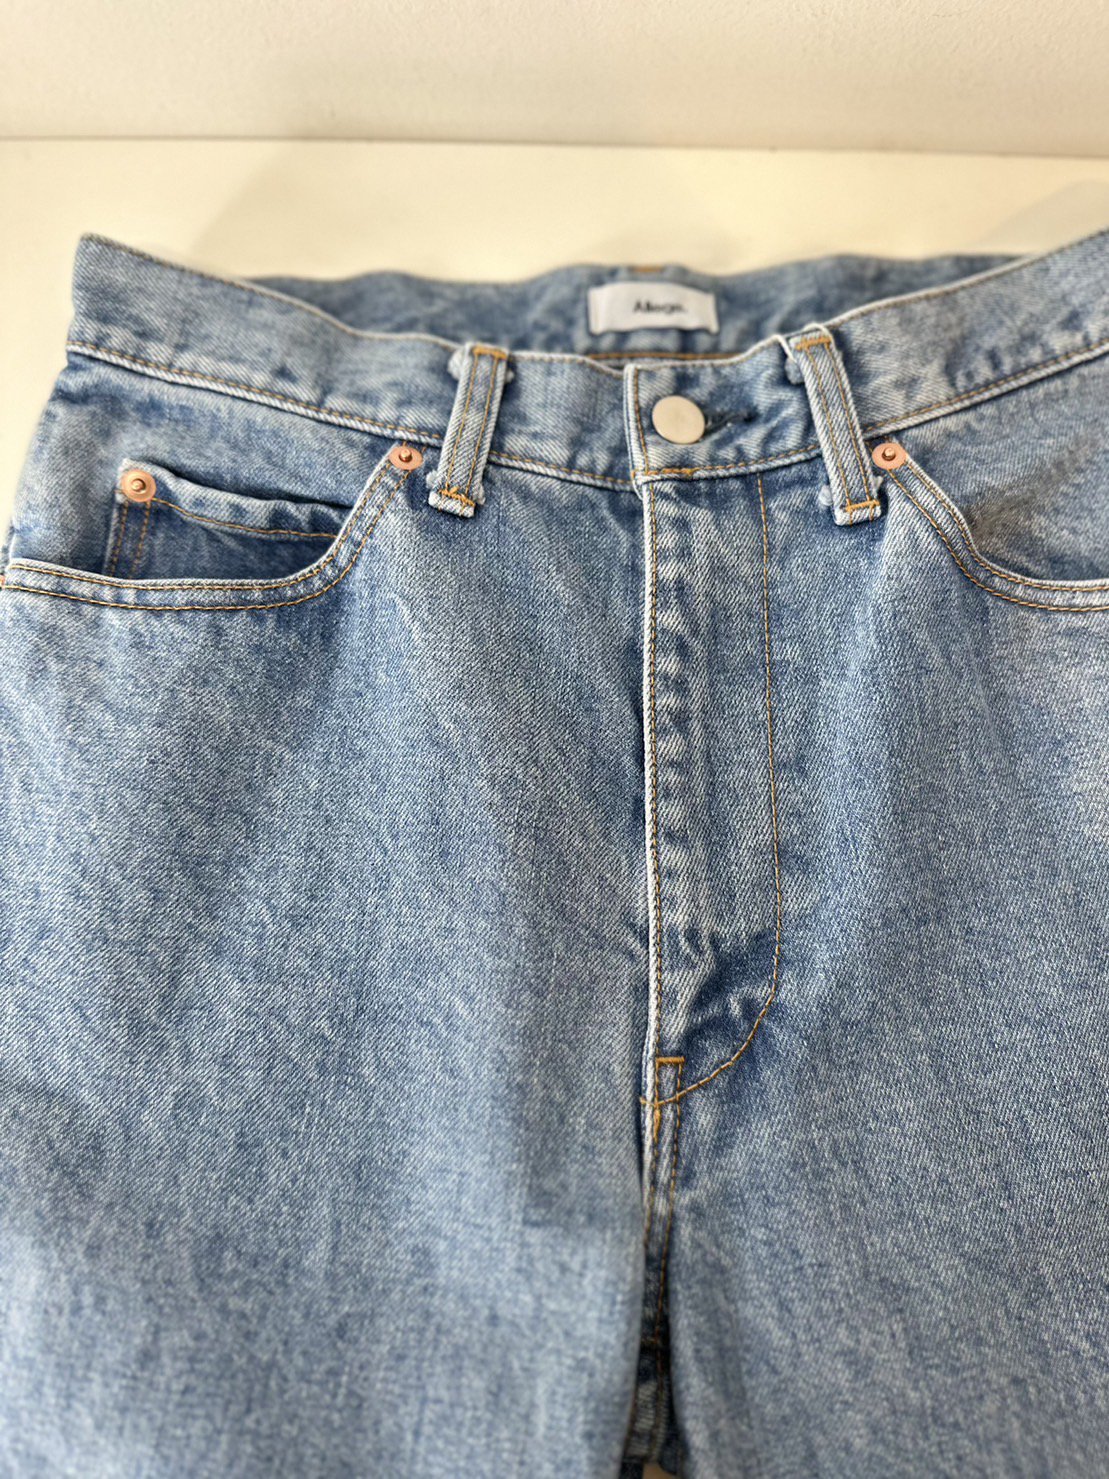 ALLEGE<br />Semi Flear Denim Pants / L.BLUE<img class='new_mark_img2' src='https://img.shop-pro.jp/img/new/icons14.gif' style='border:none;display:inline;margin:0px;padding:0px;width:auto;' />